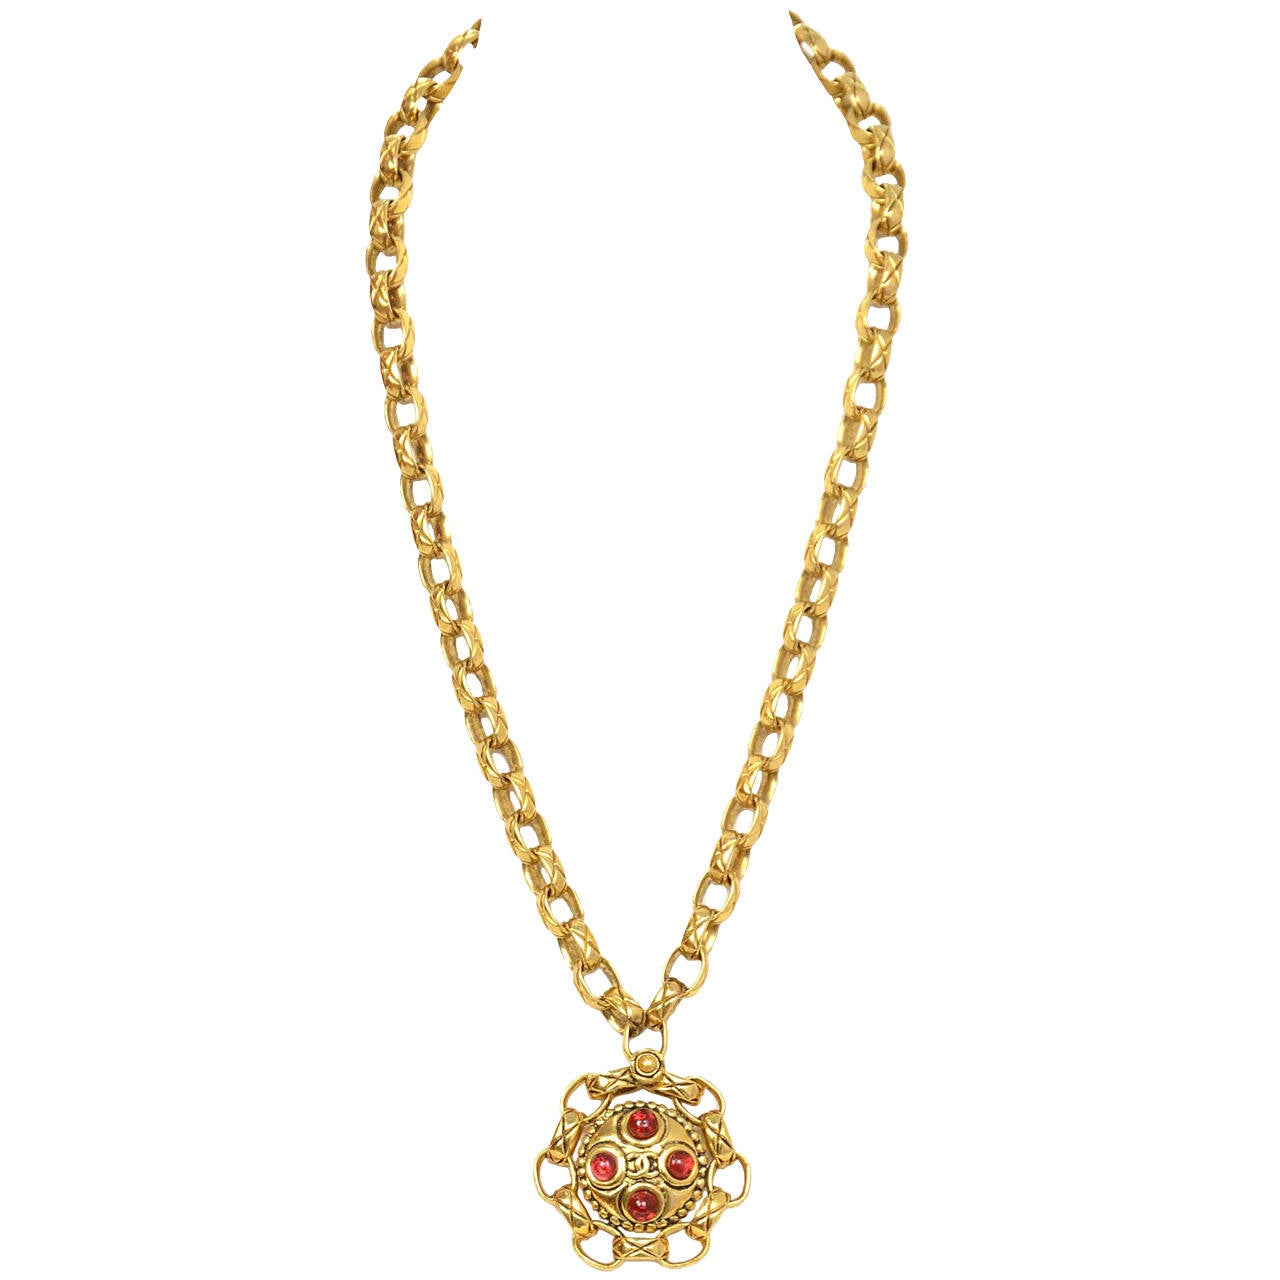 CHANEL Vintage Gold Quilted Chain Link Necklace w/CC & Red Gripoix Pendant